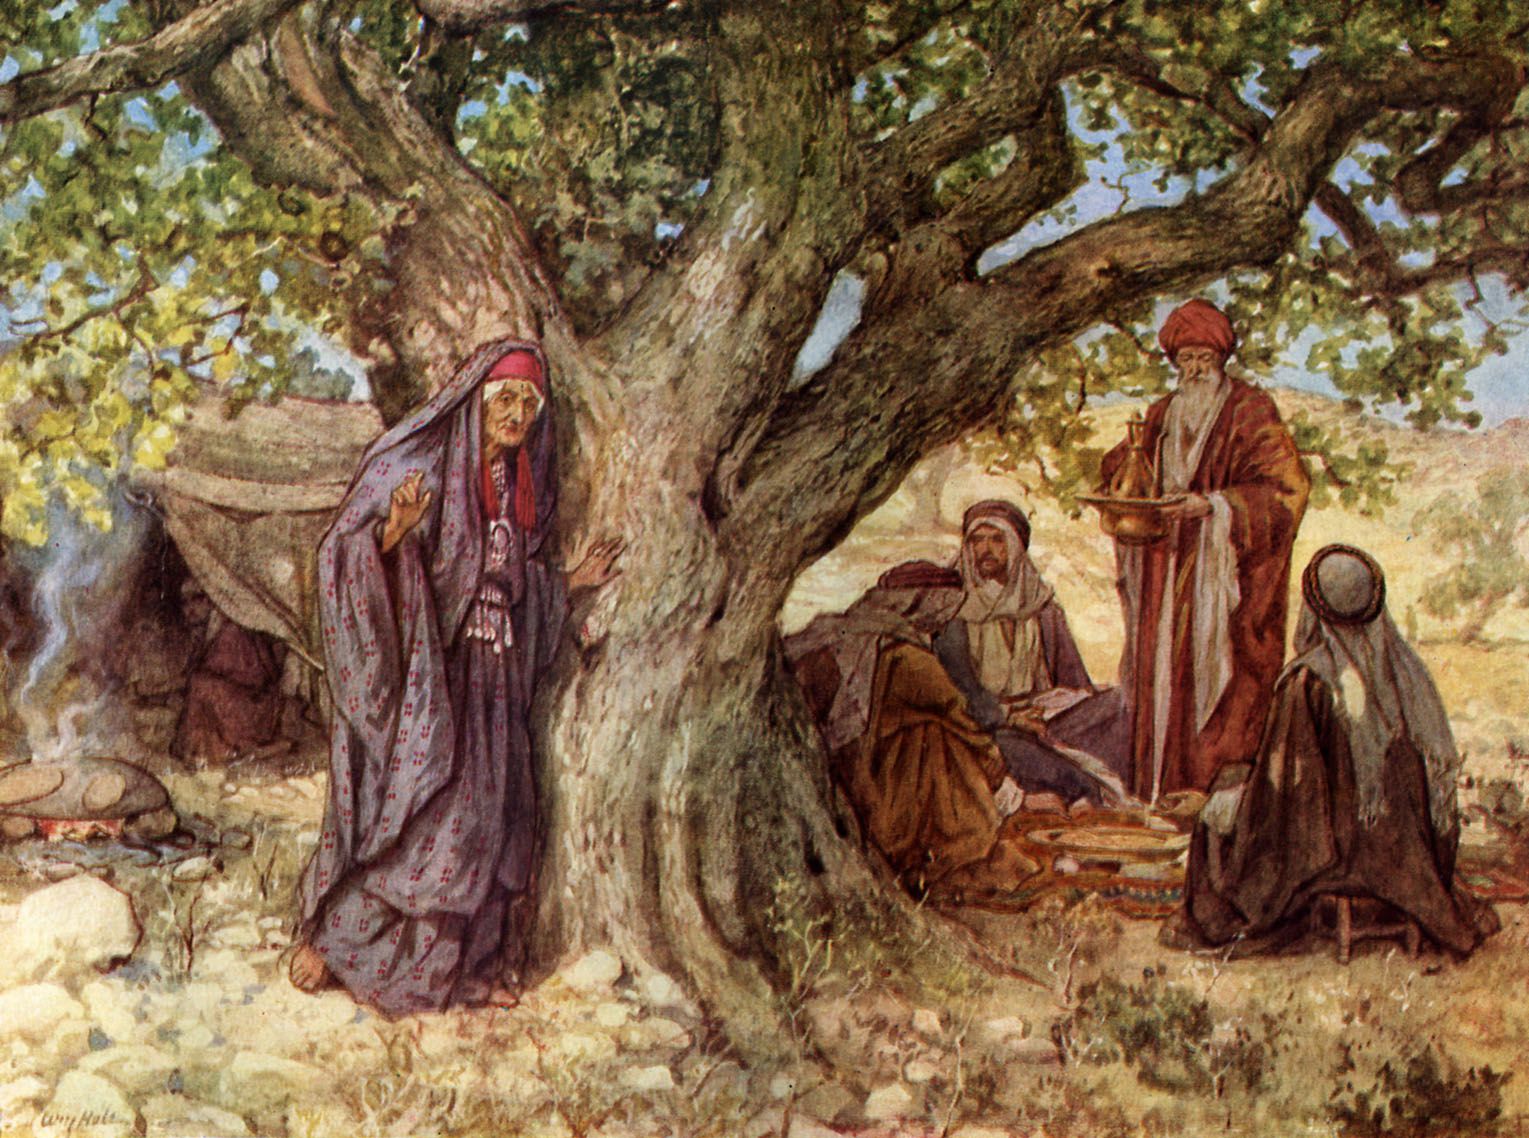 Sarah in the Bible - Abraham's Wife and Mother of Isaac